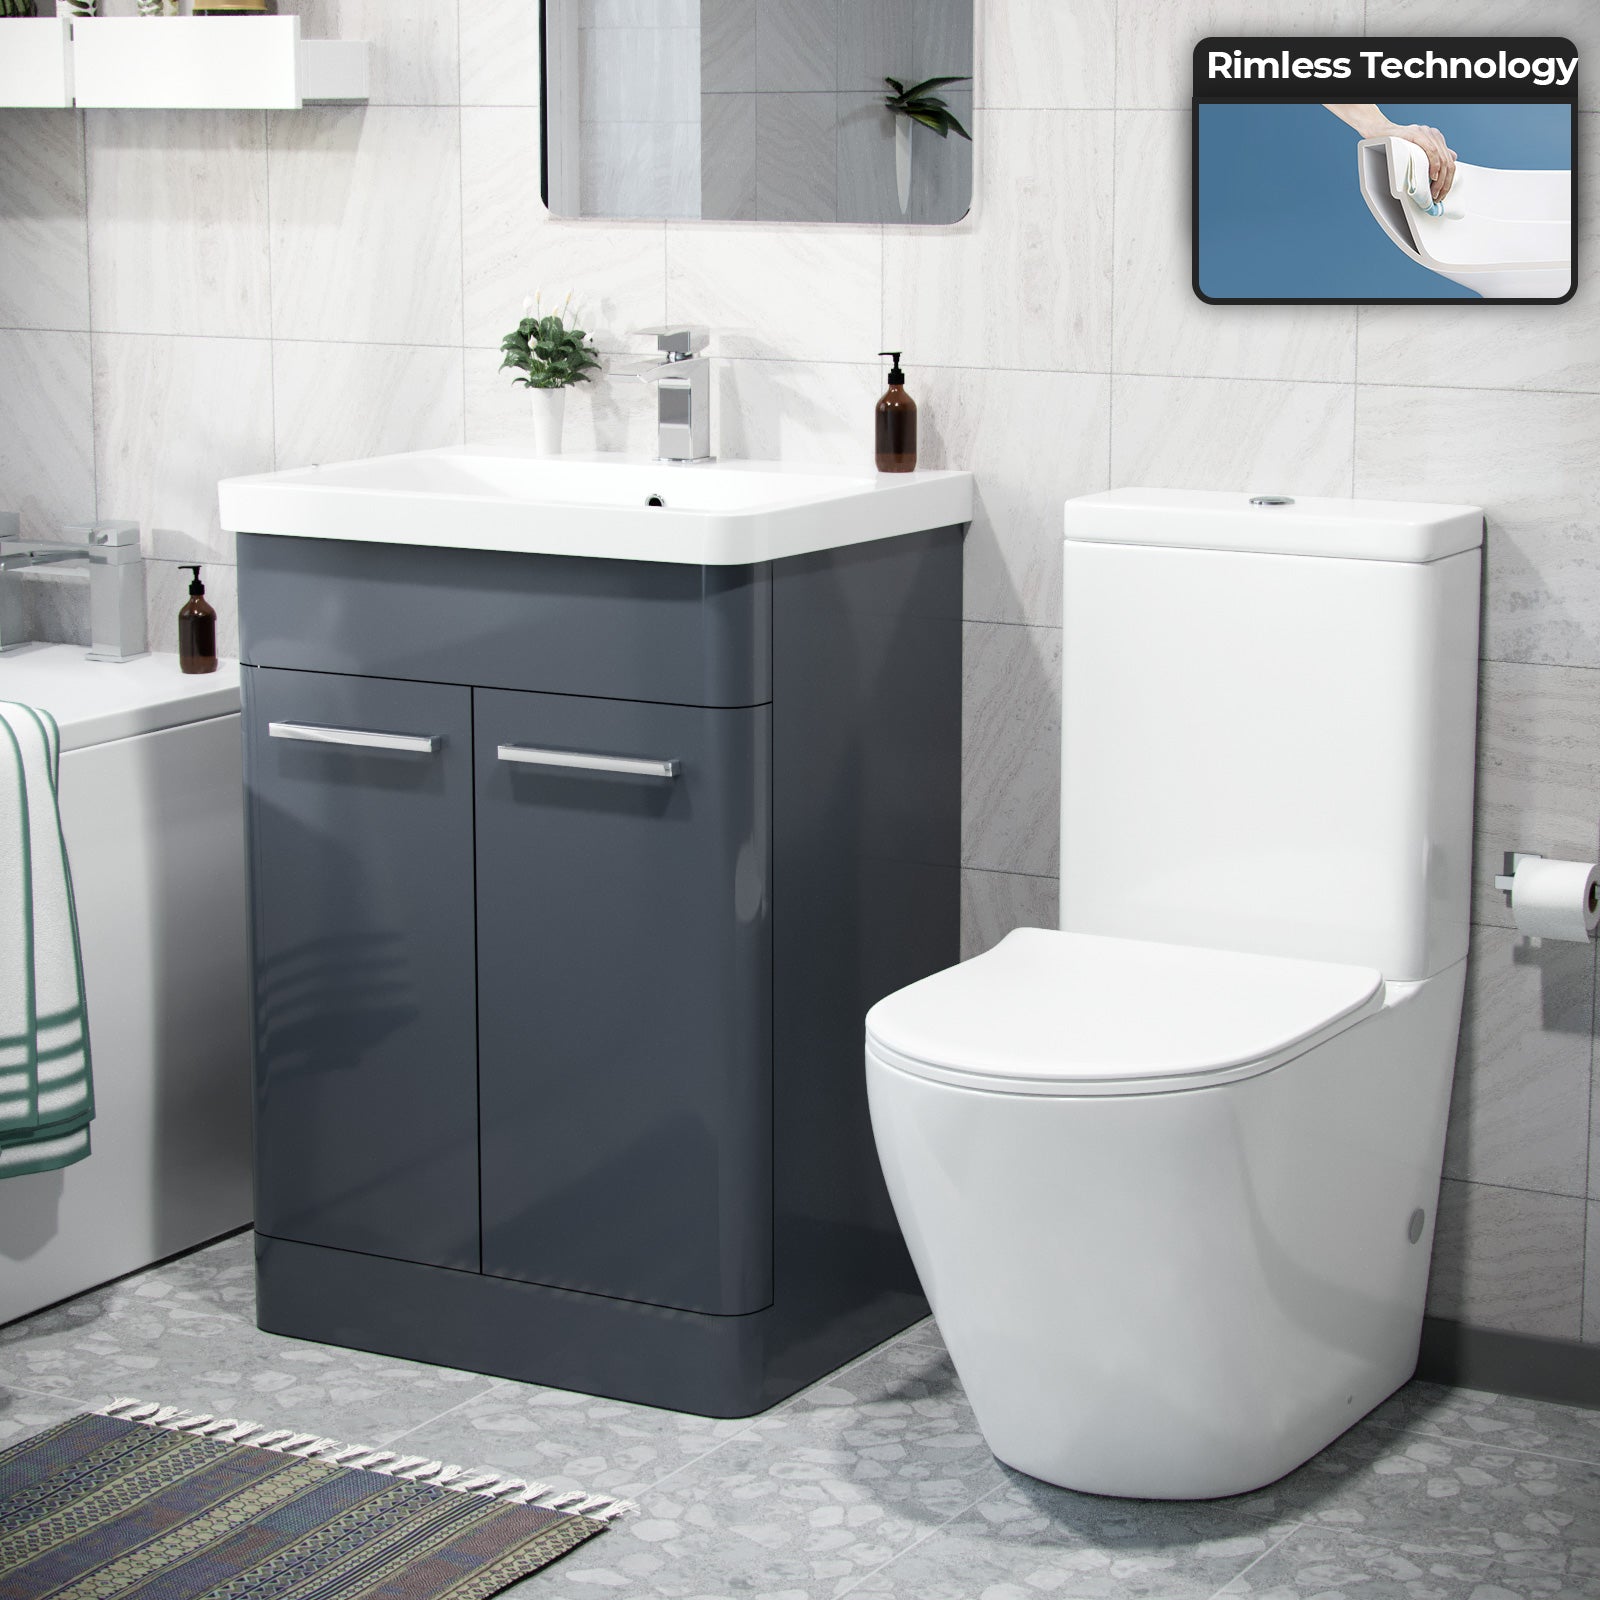 Afern 600mm Freestanding Vanity Unit, Curved Rimless Close Coupled Toilet Anthracite